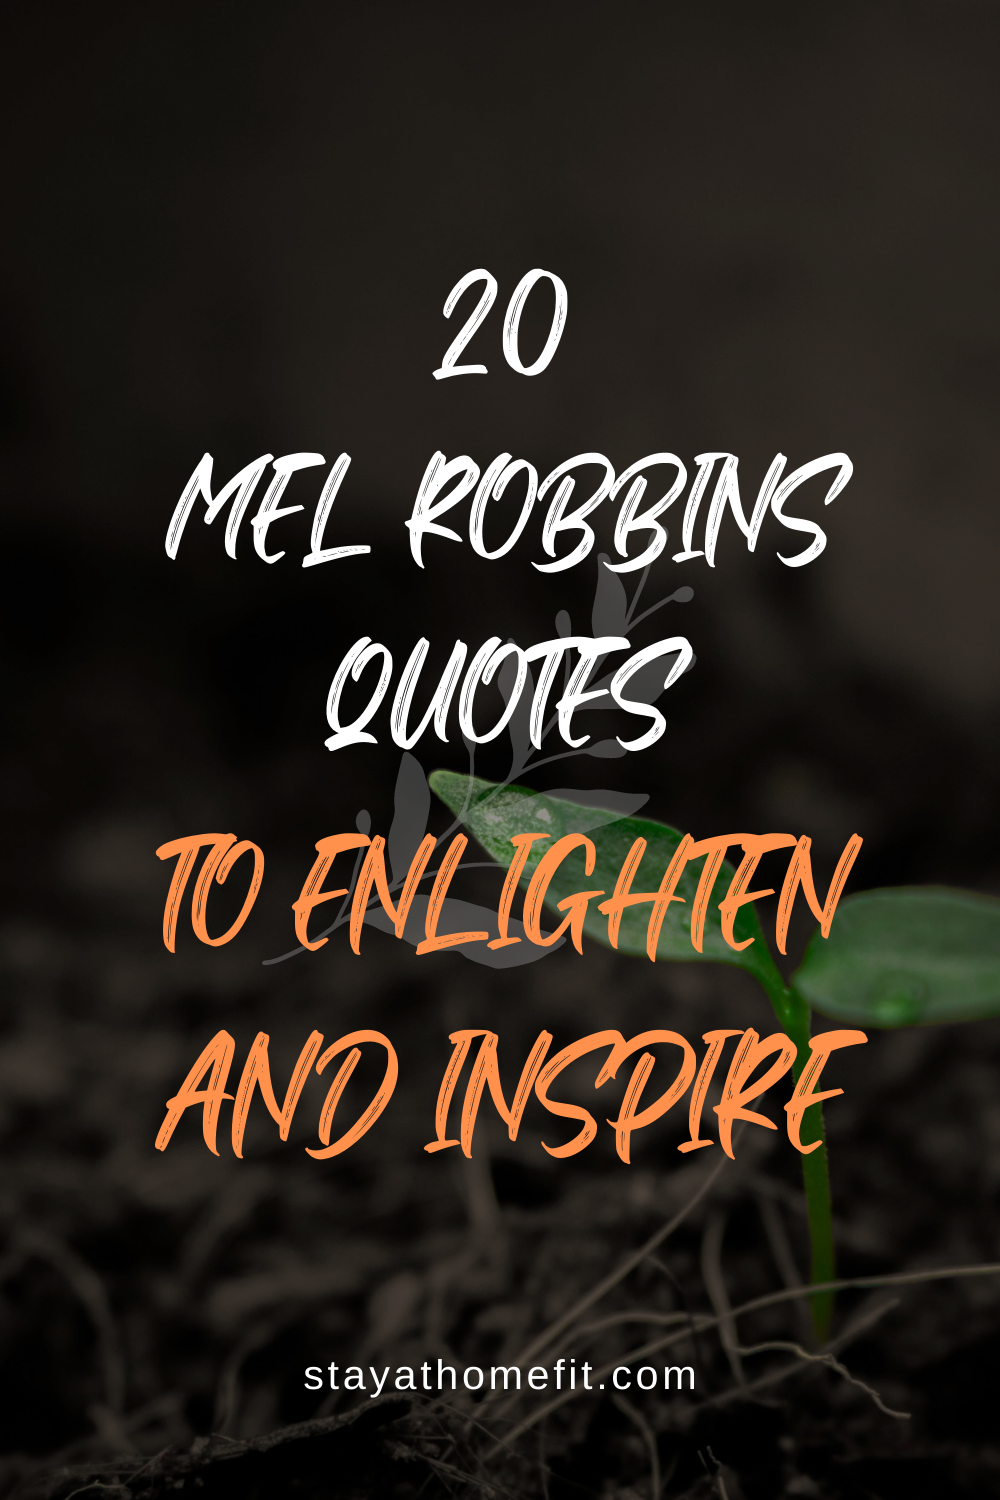 20 Mel Robbins Quotes to Enlighten and Inspire